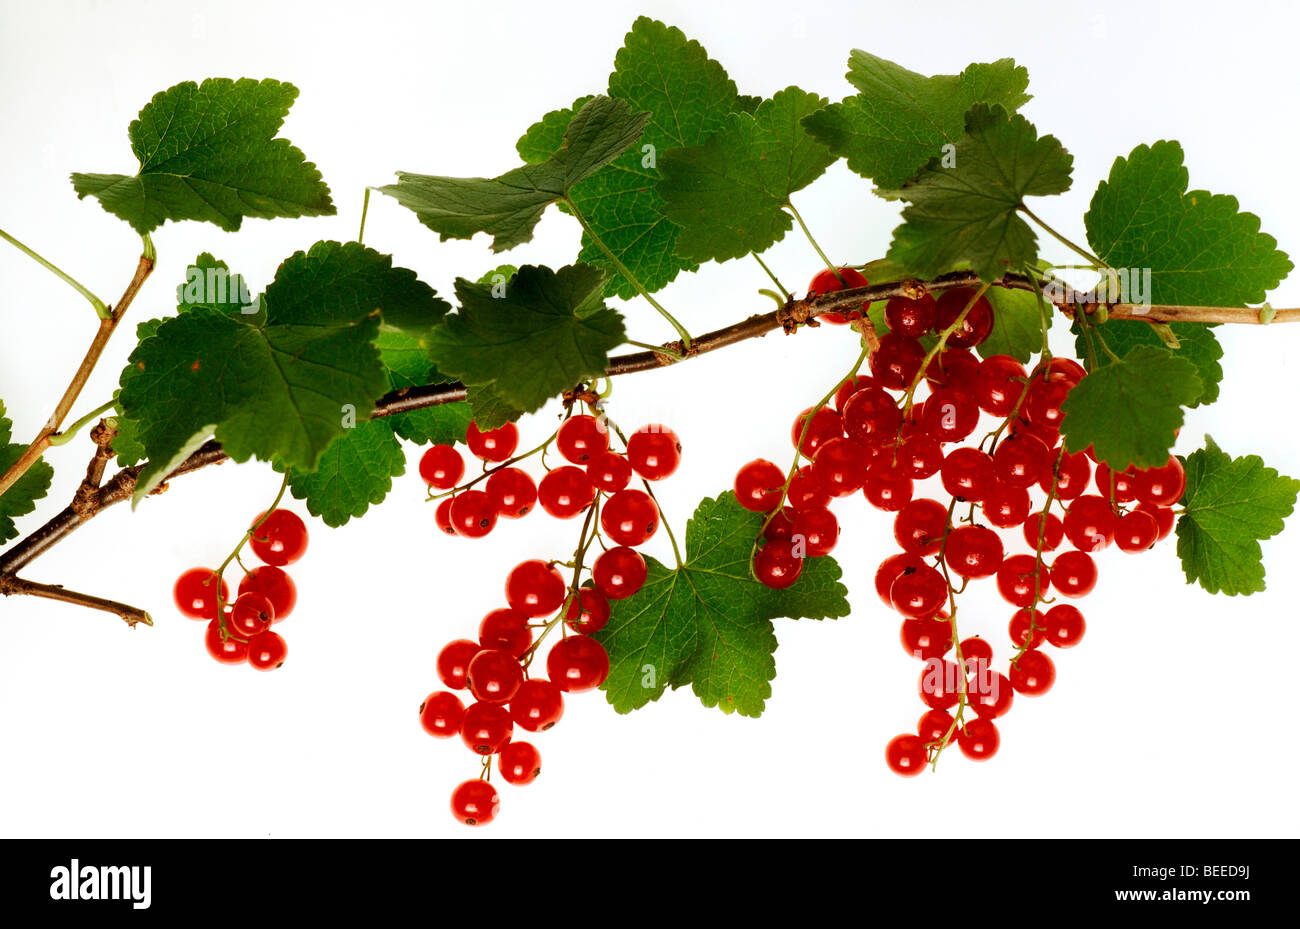 Redcurrants (Ribes uva-crispa) on a twig with leaves Stock Photo